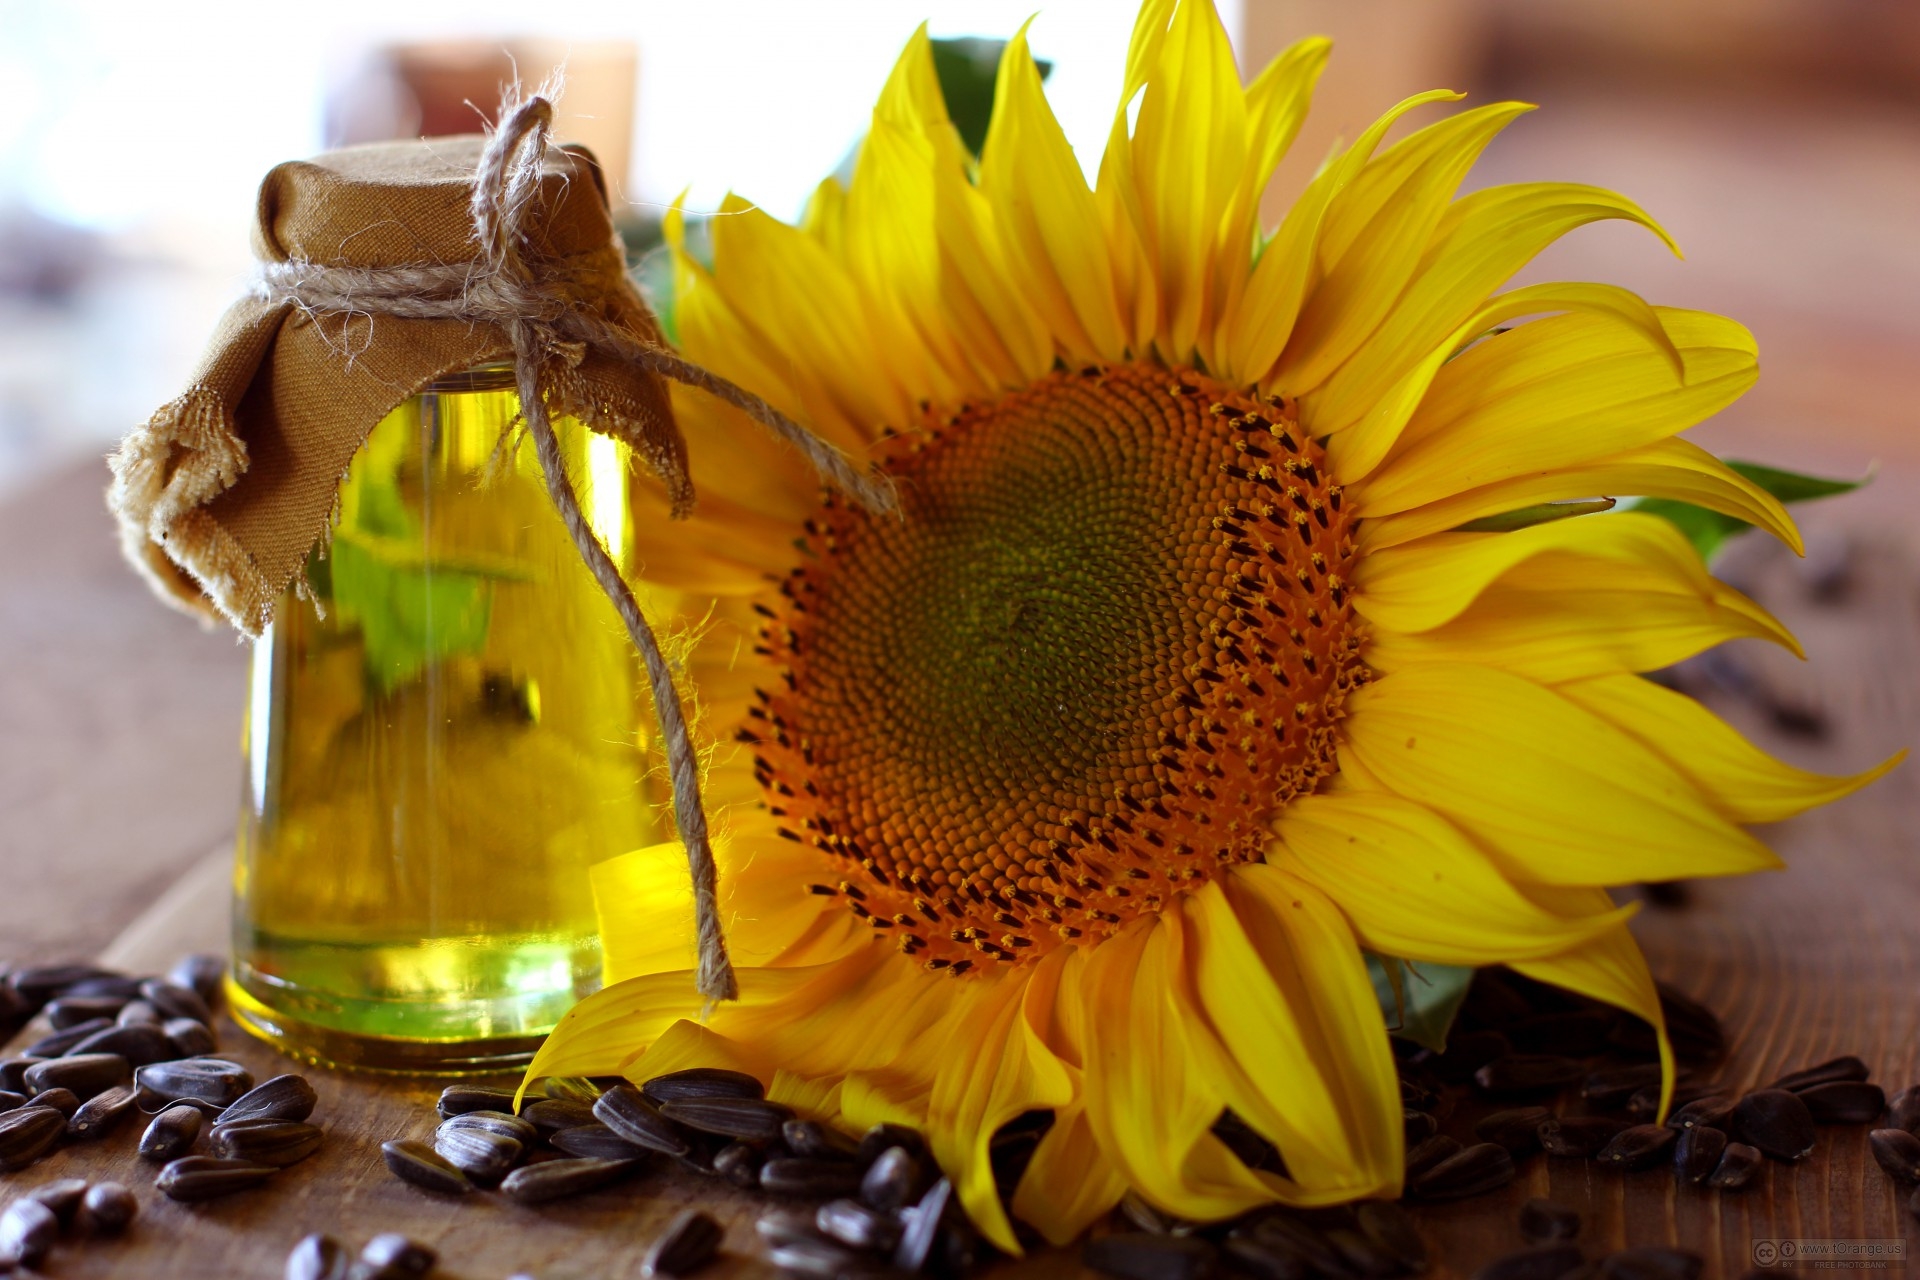 Ukraine reduced sunflower oil exports by 15% due to reduced purchases by China and India